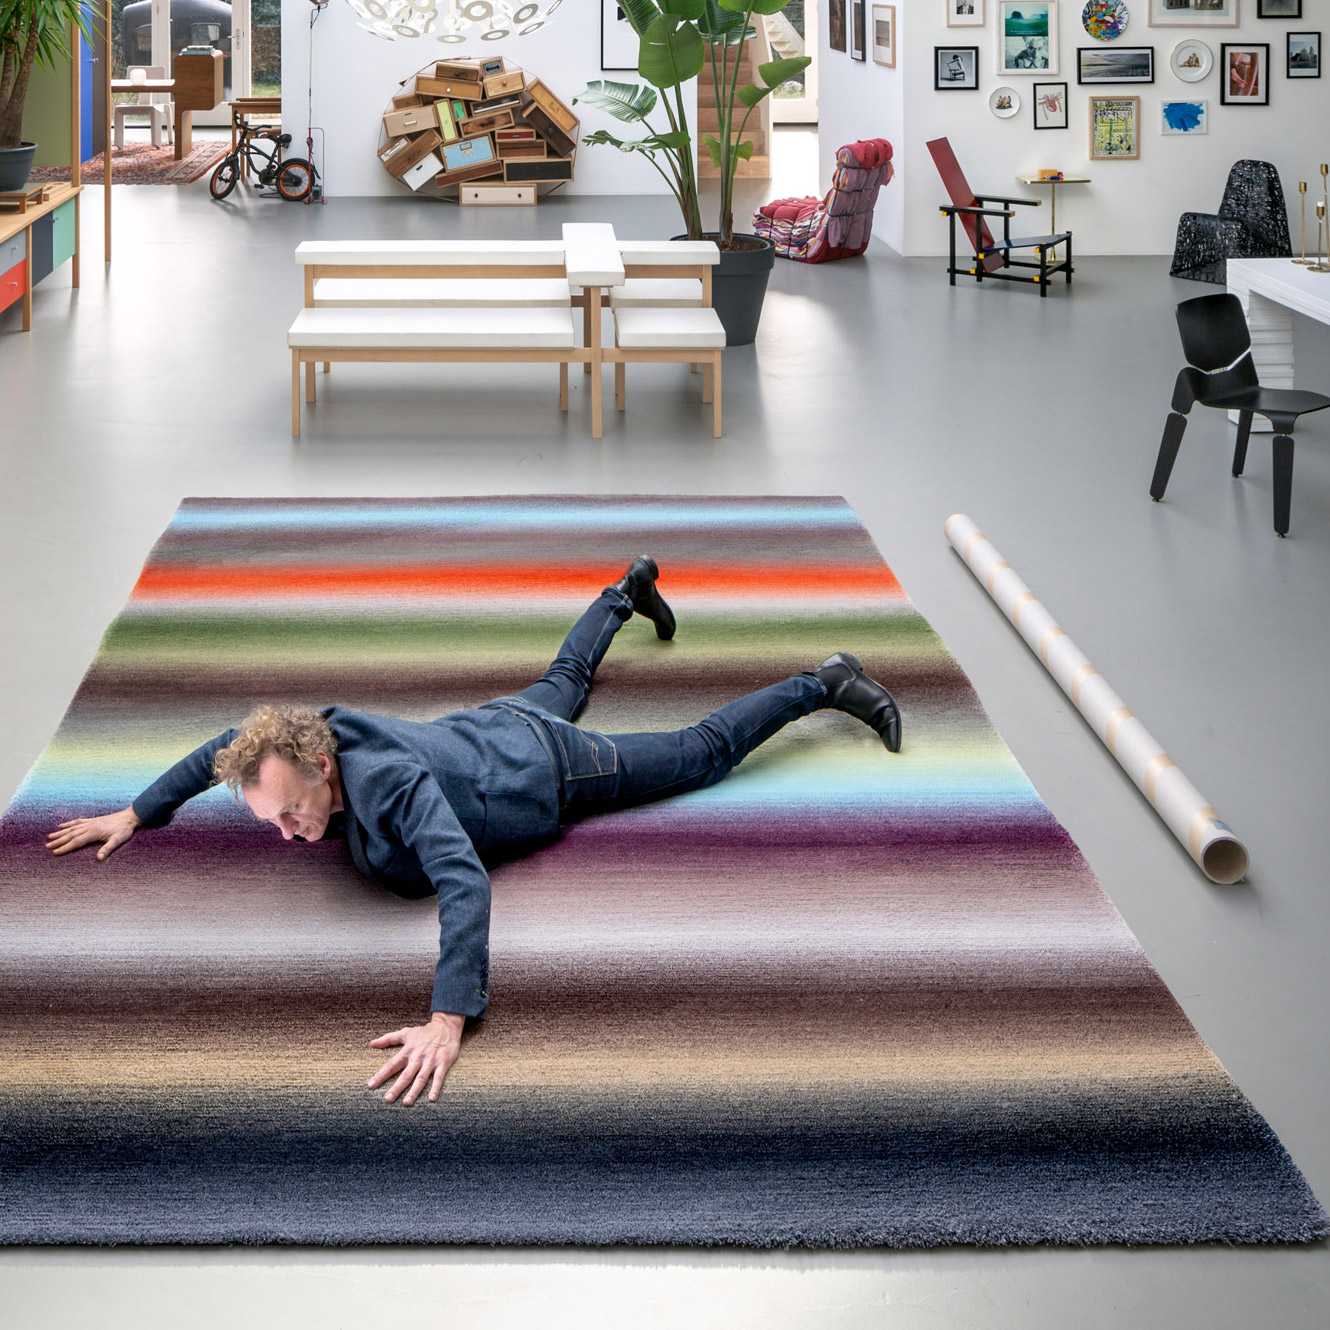 Richard Hutten and Dutch designers create Freedom rugs for Carpet Sign